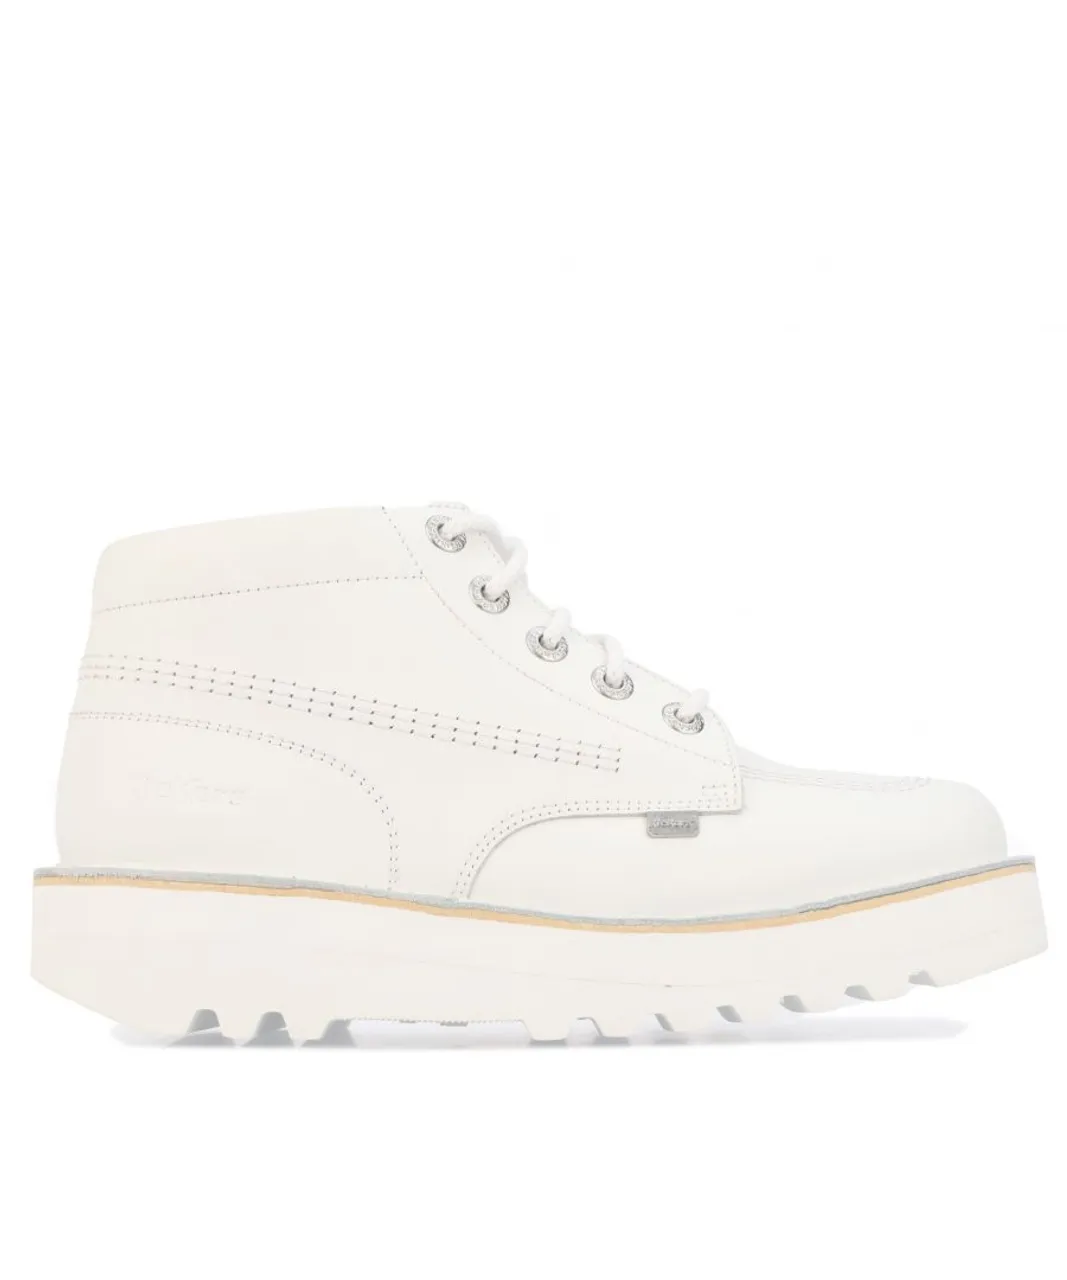 Kickers Womenss Kick Hi Stack Boots in White Leather